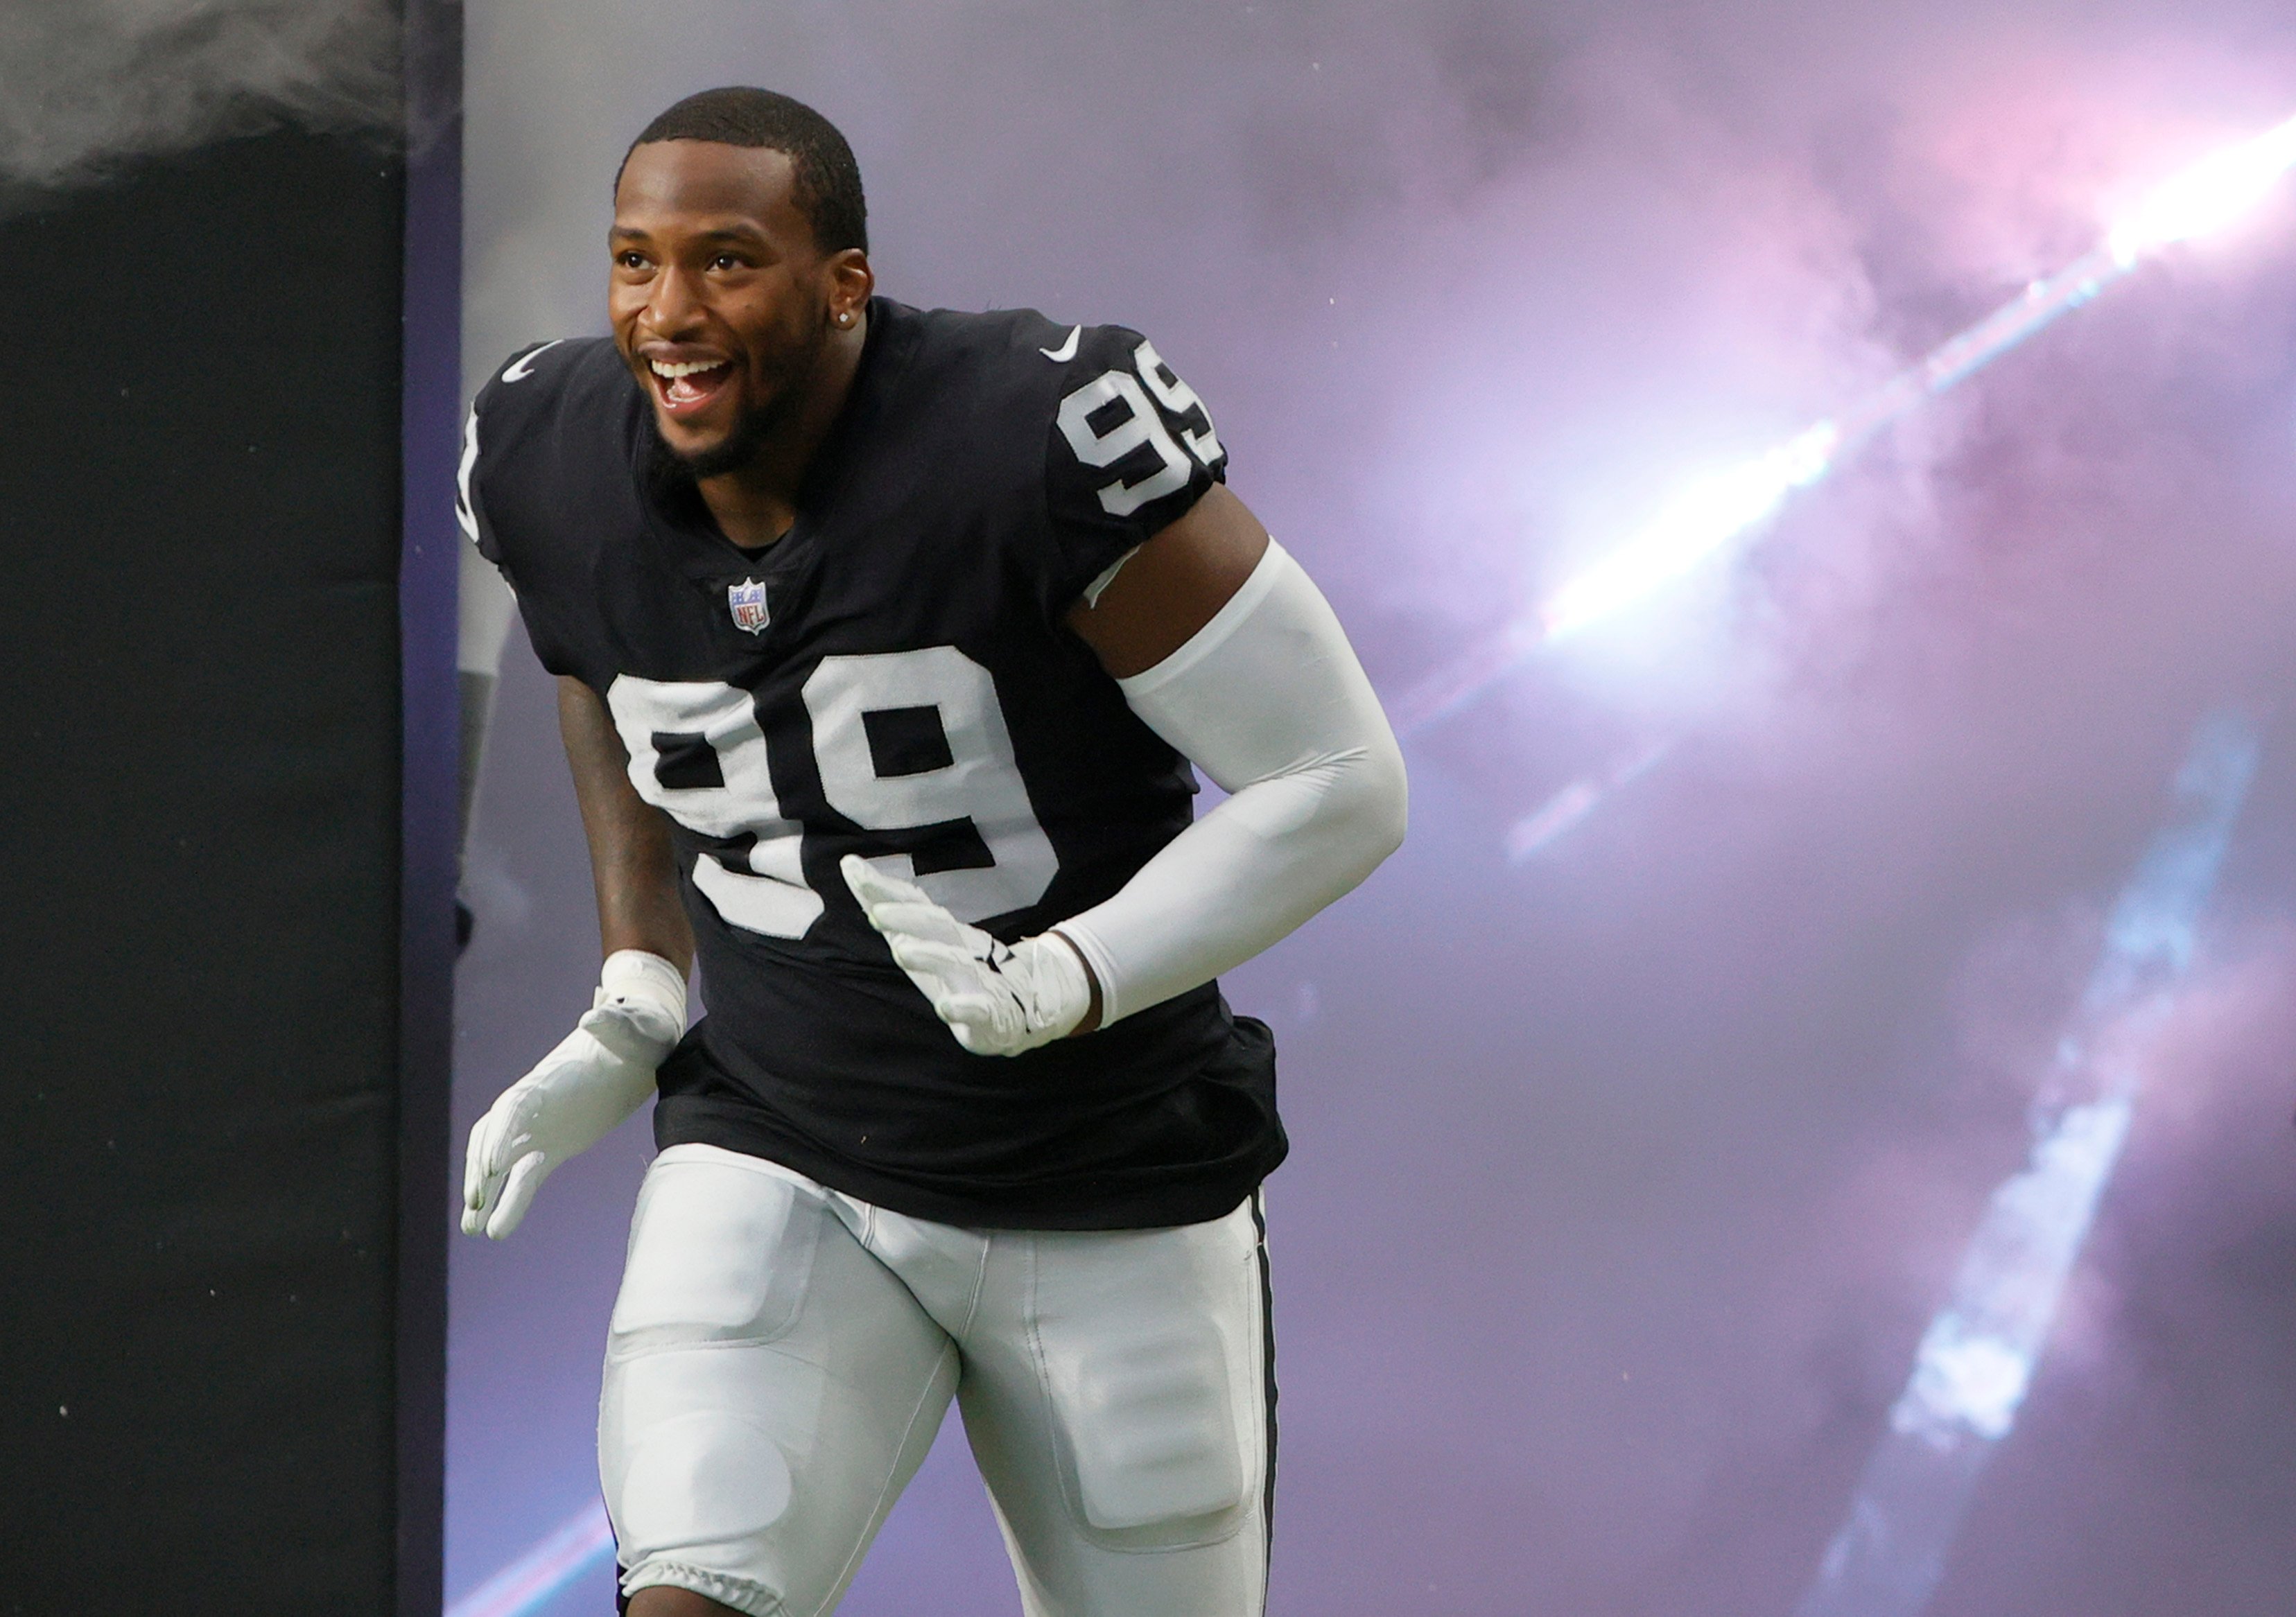 Las Vegas Raiders defensive end Clelin Ferrell, who gave an interview to Showbiz Cheat Sheet, smiling as he's introduced before a preseason game